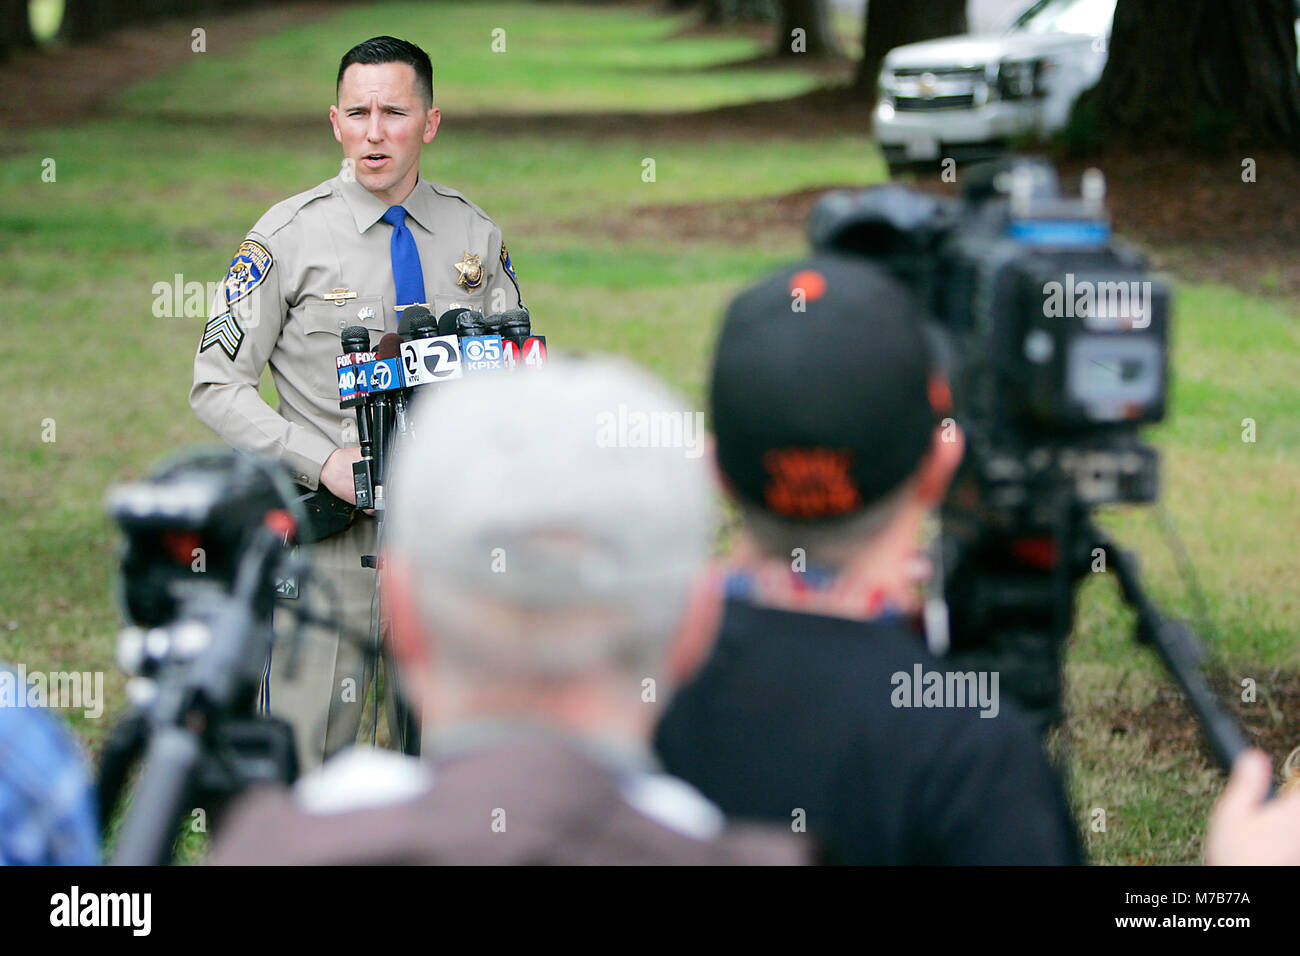 Yountville, California, USA. 9th March, 2018. Sgt. ROBERT NACKE, public information officer for the Golden Gate Division of the California Highway Patrol, addresses the media at a press conference at the California Veterans Home at Yountville on Friday after reports of an active shooter. An armed man was reported on the facility with a rifle and was said to have taken a number of people hostage. Credit: Napa Valley Register/ZUMA Wire/Alamy Live News Credit: ZUMA Press, Inc./Alamy Live News Stock Photo